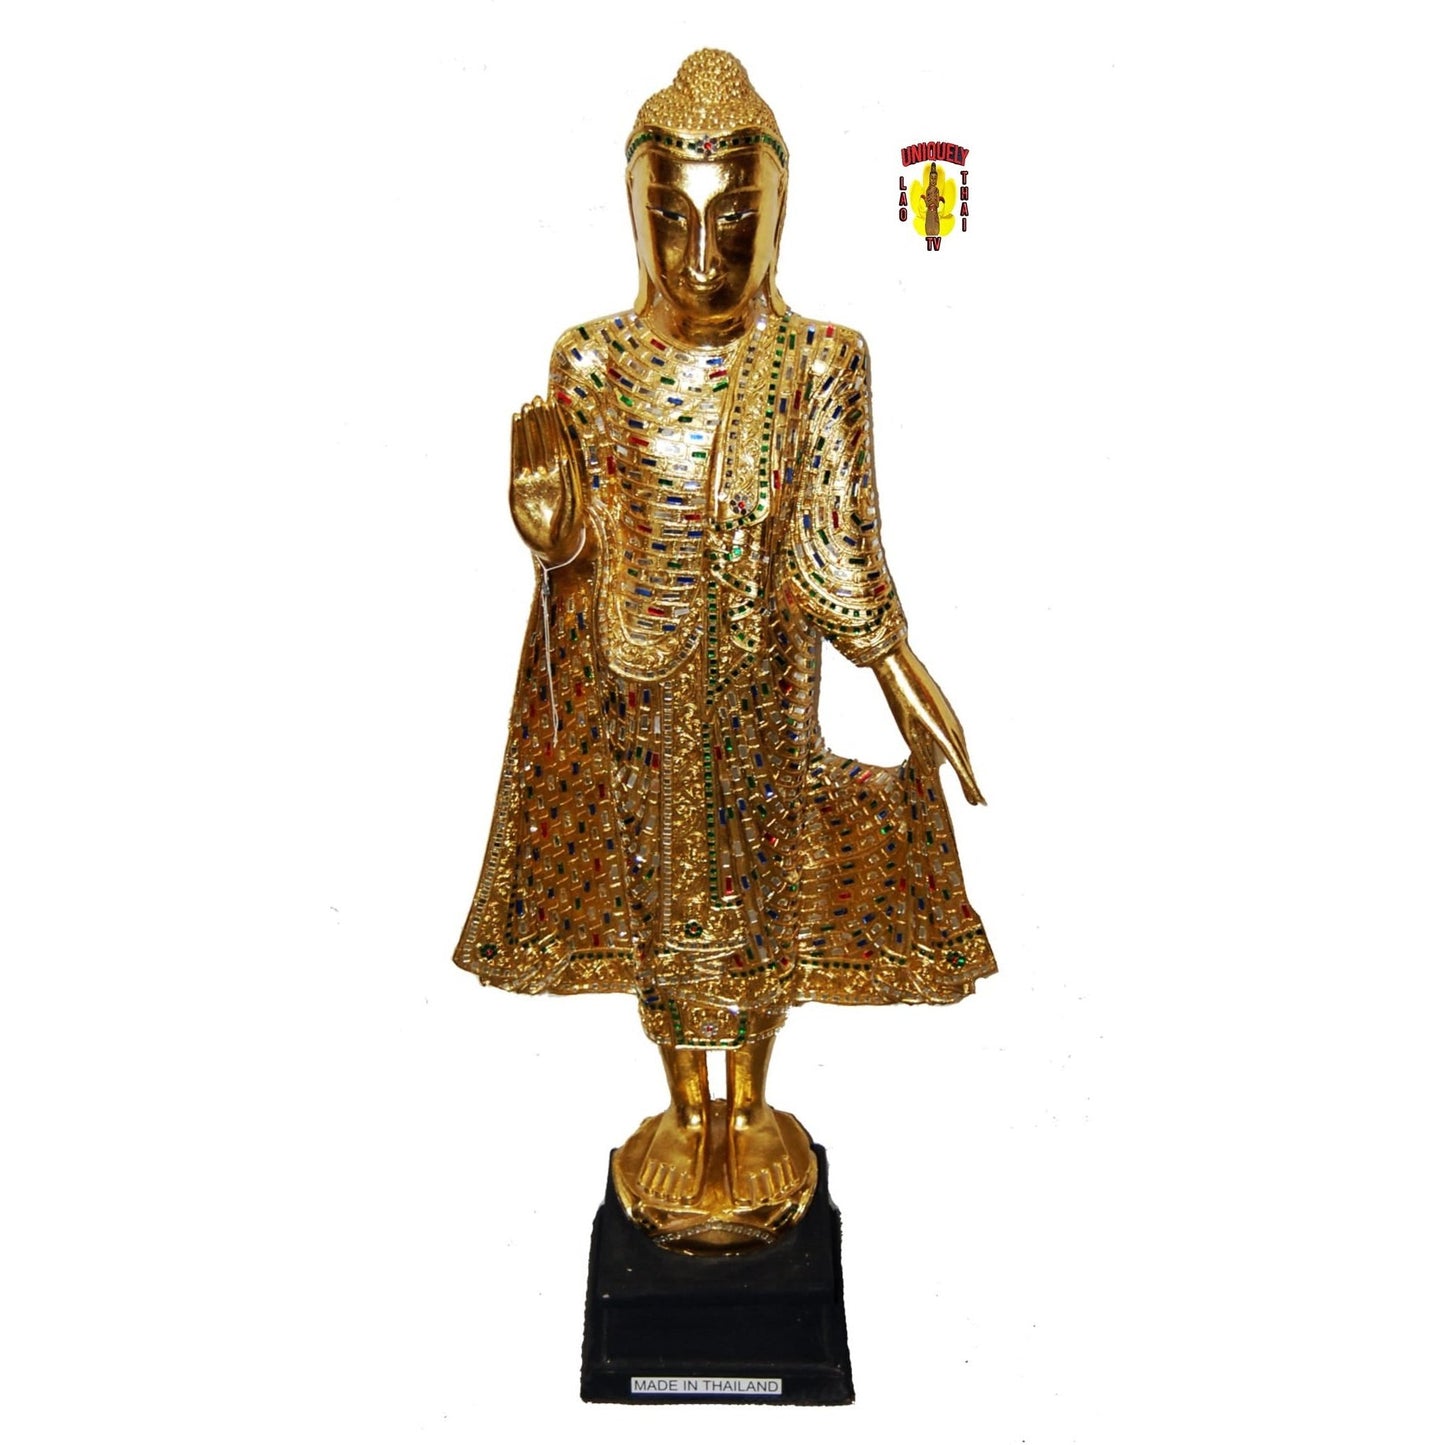 Standing Buddha Statue Gold Leaf 46 Inch Tall One Palm Up